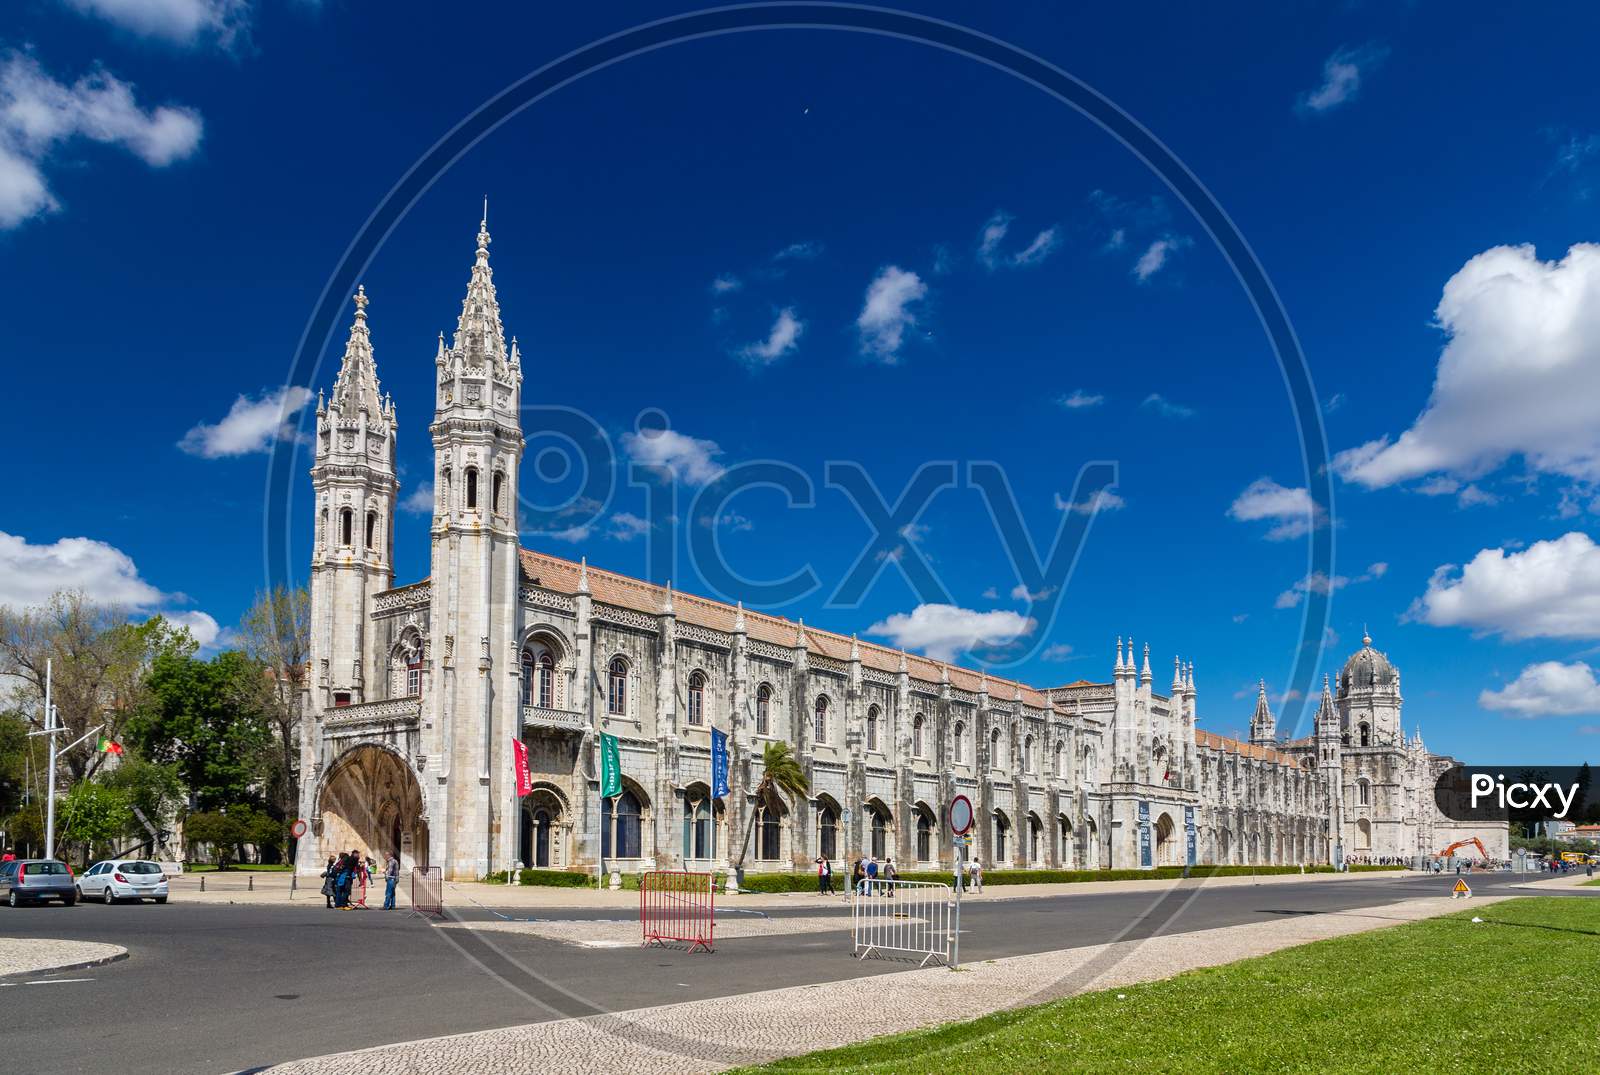 Maritime Museum And Jeronimos Monastery In Lisbon